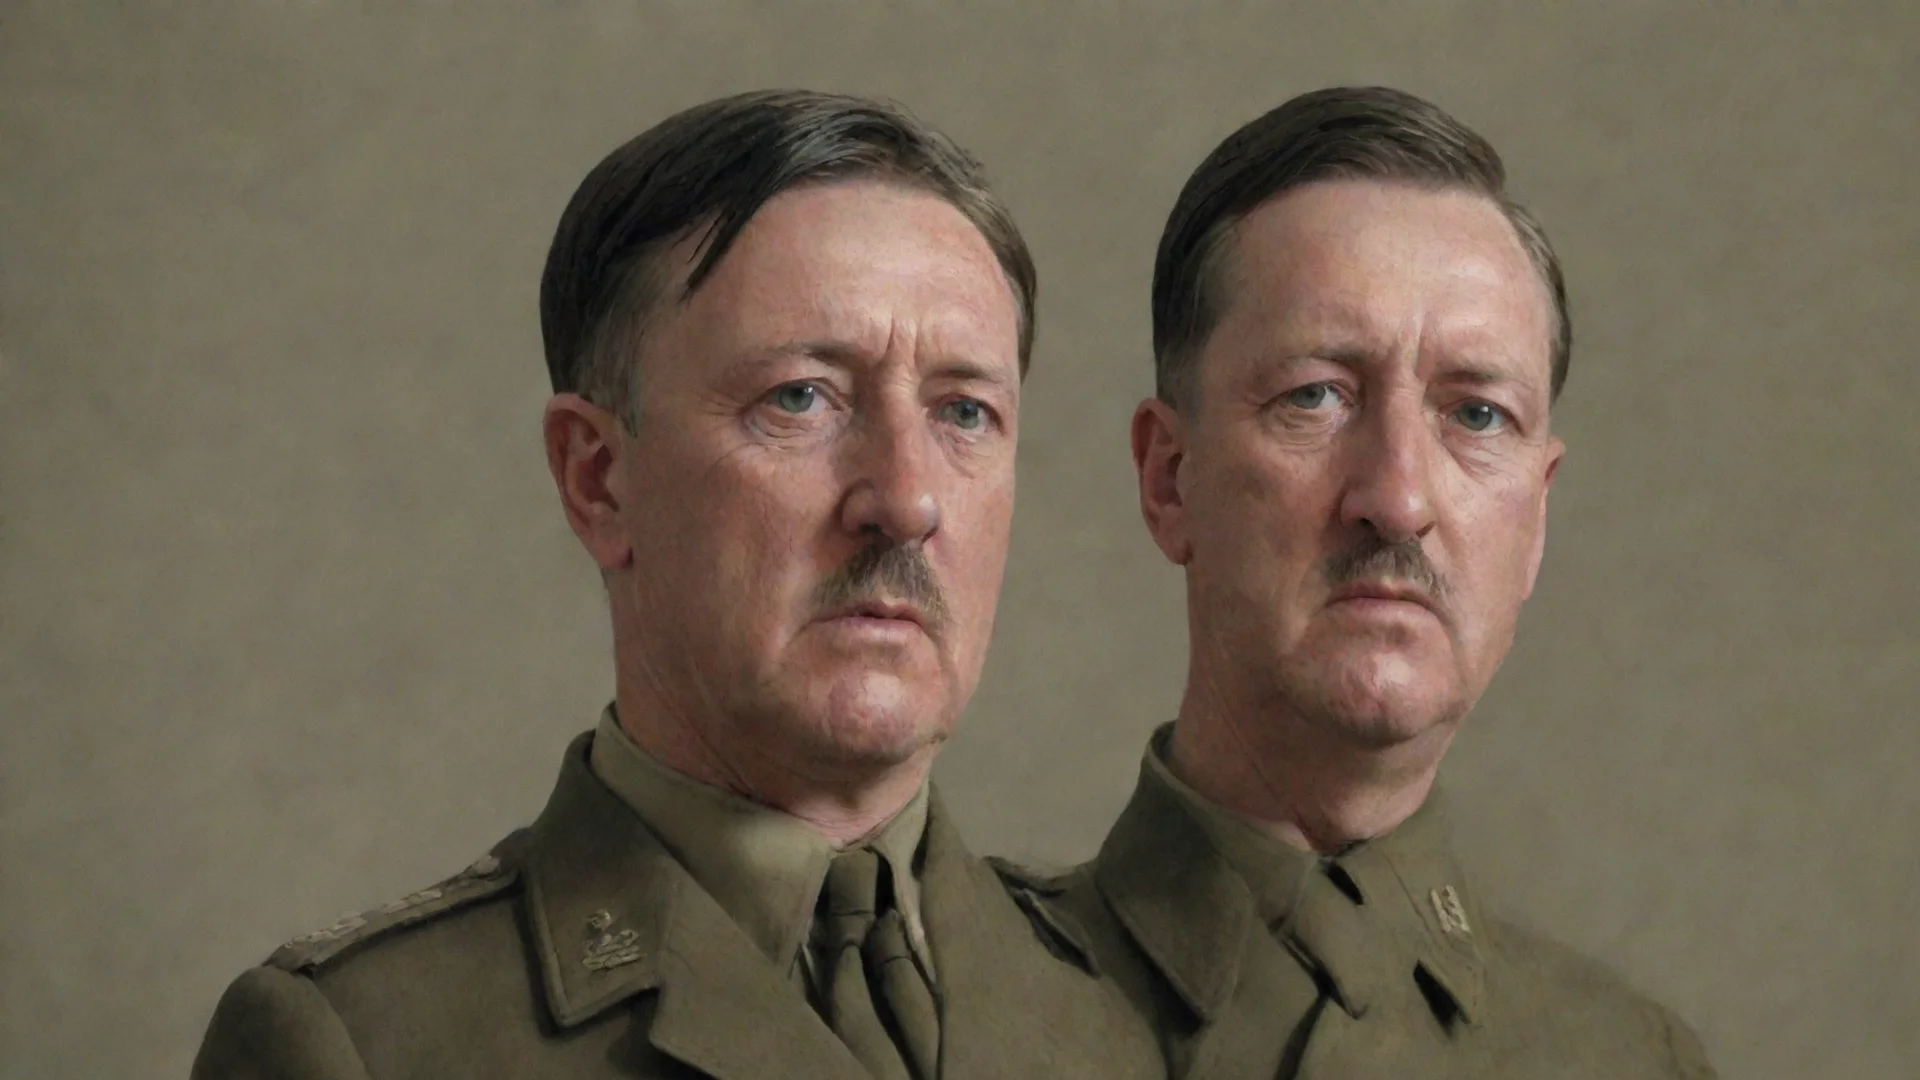 aiamazing adolf hitler awesome portrait 2 wide